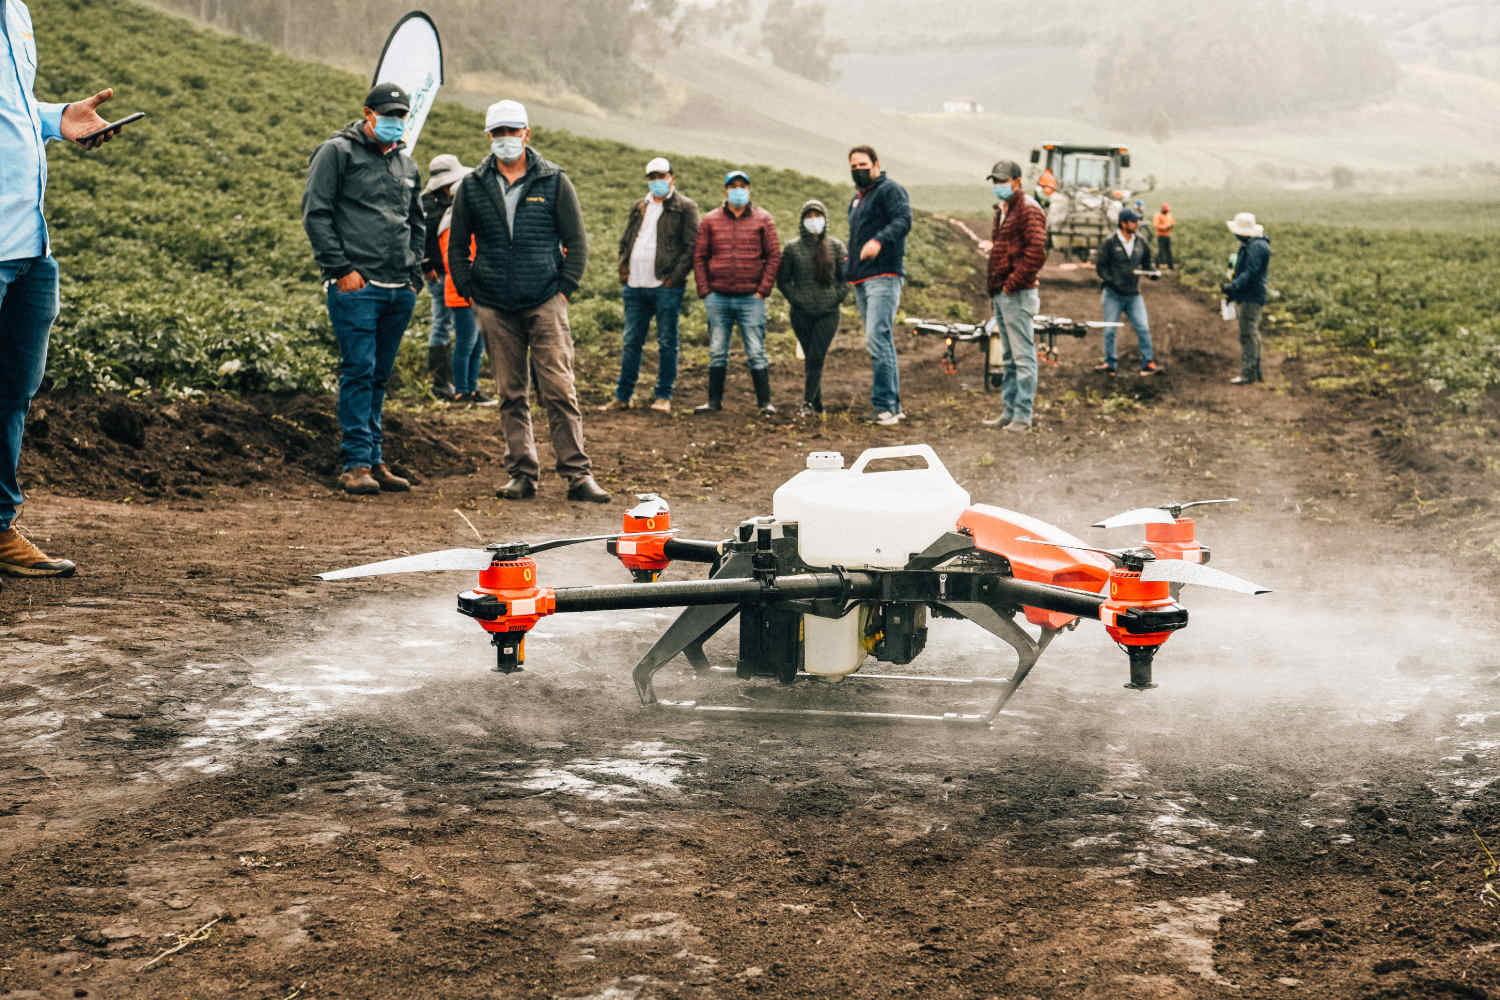 Sitting beside a high-altitude potato field, an XAG Agricultural Drone impressed people on site by precisely controlling its atomised droplets, July 2021